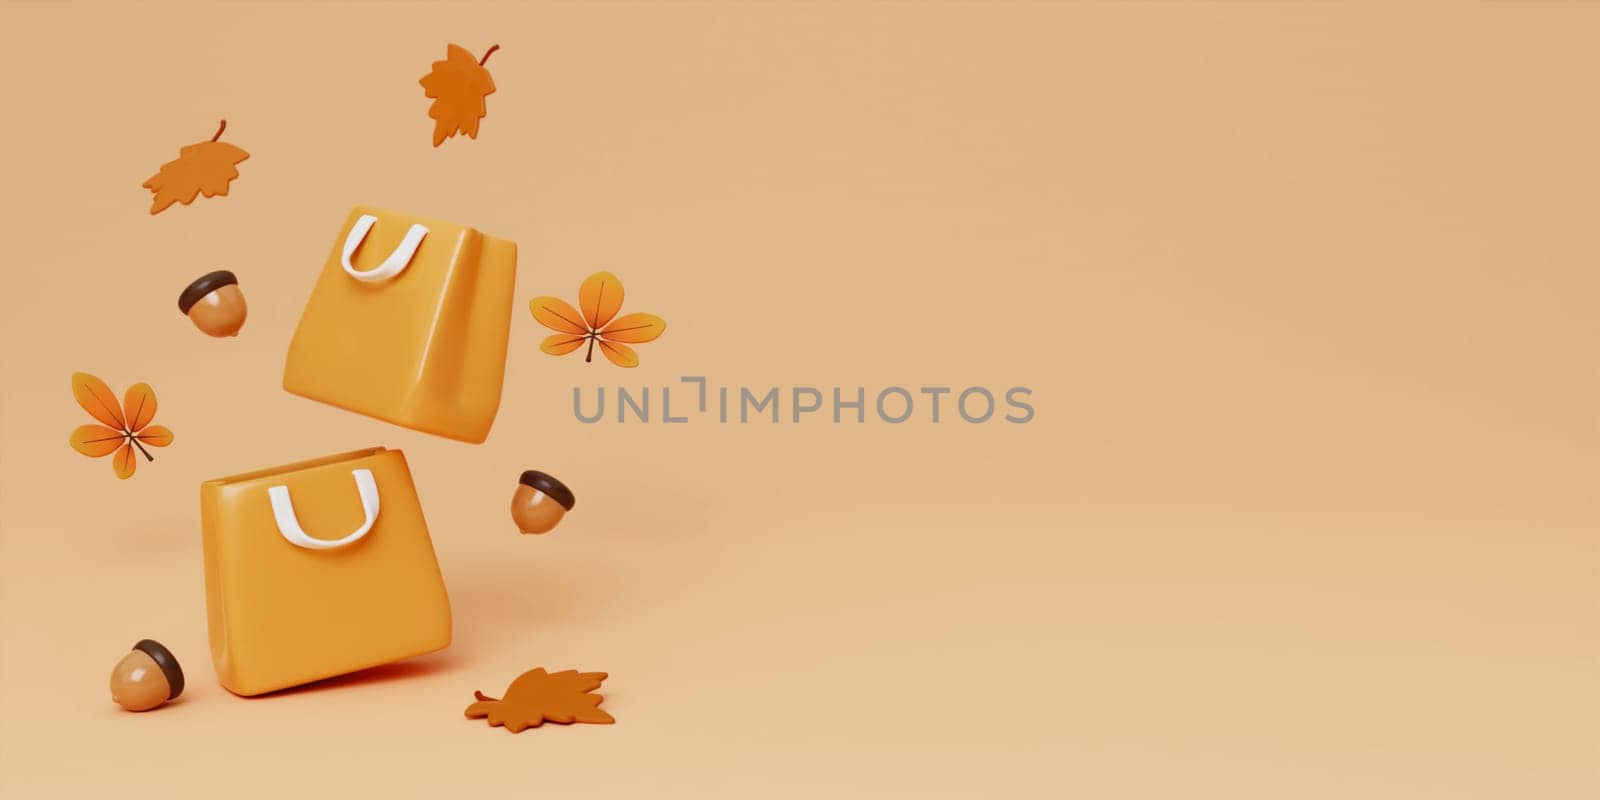 3d shopping bag, walnut, gift boxes, leaves. 3d render for banner or poster design for autumn sale. copy space. delicate pastel colors. 3d rendering.